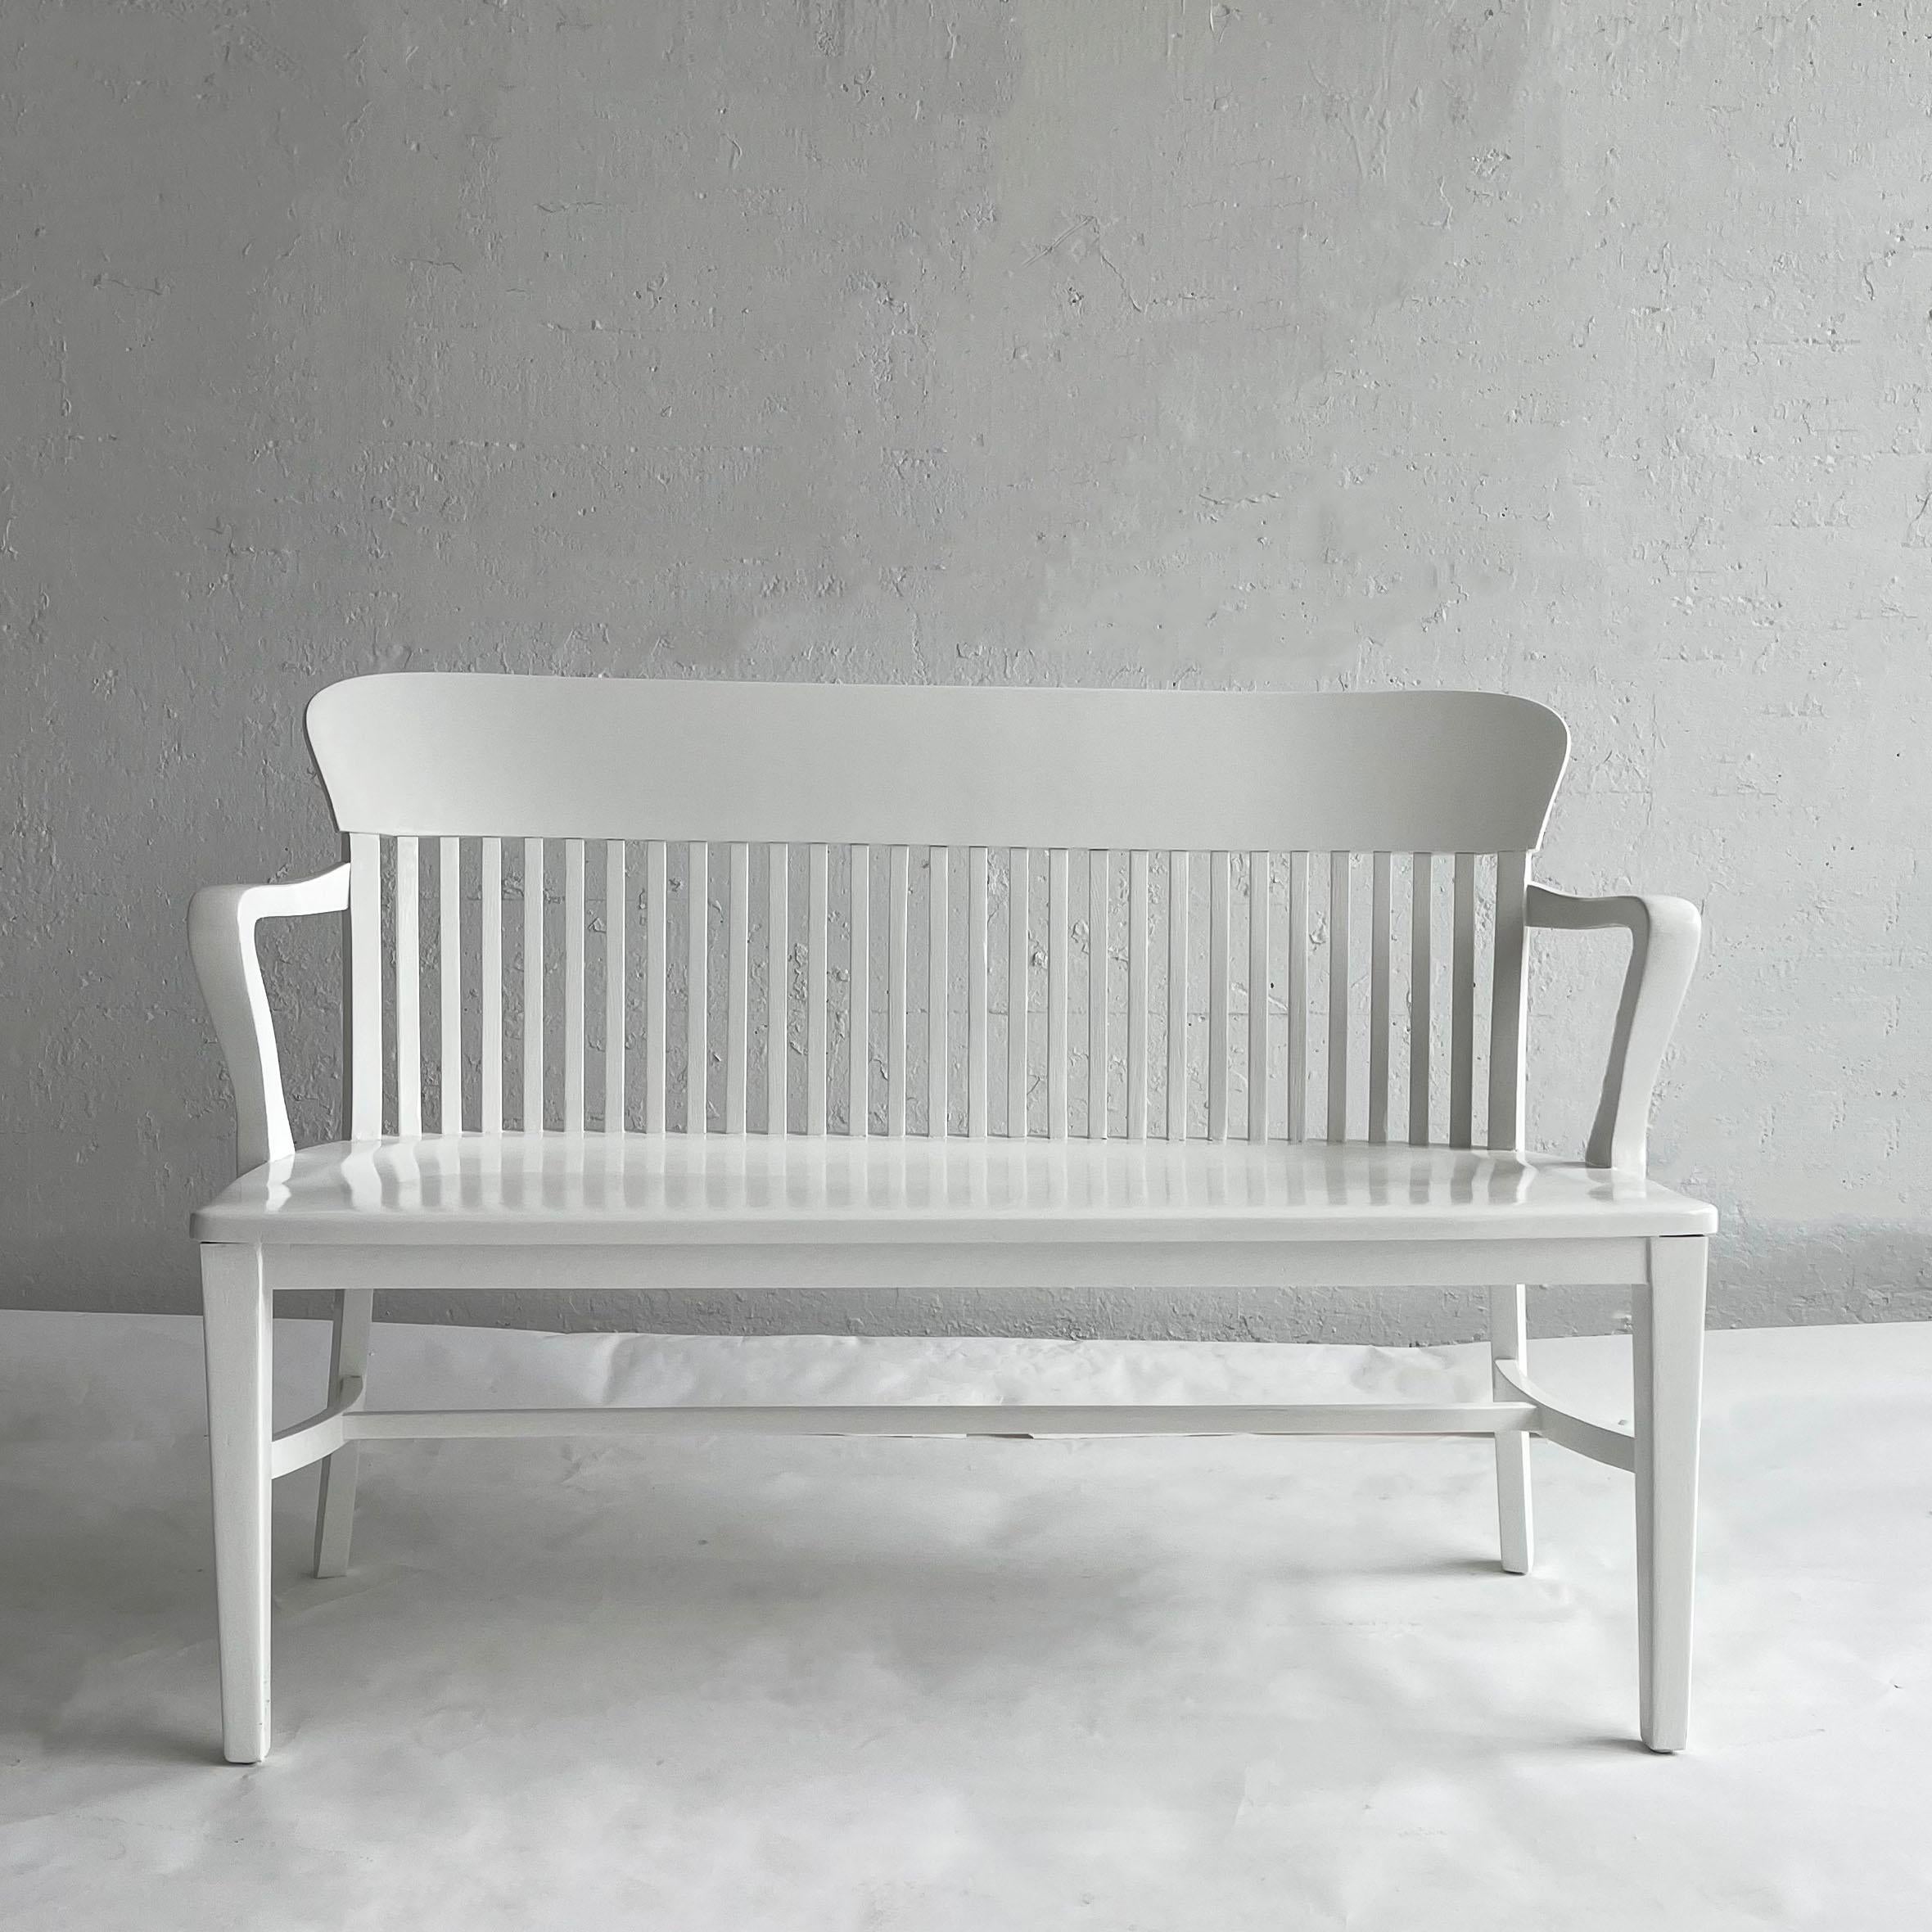 Classic, industrial, midcentury, bank of England or court bench lacquered in crisp satin white features a contoured seat and slat back. This iconic piece works with any decor and numerous uses from an entryway bench to dining room seating.